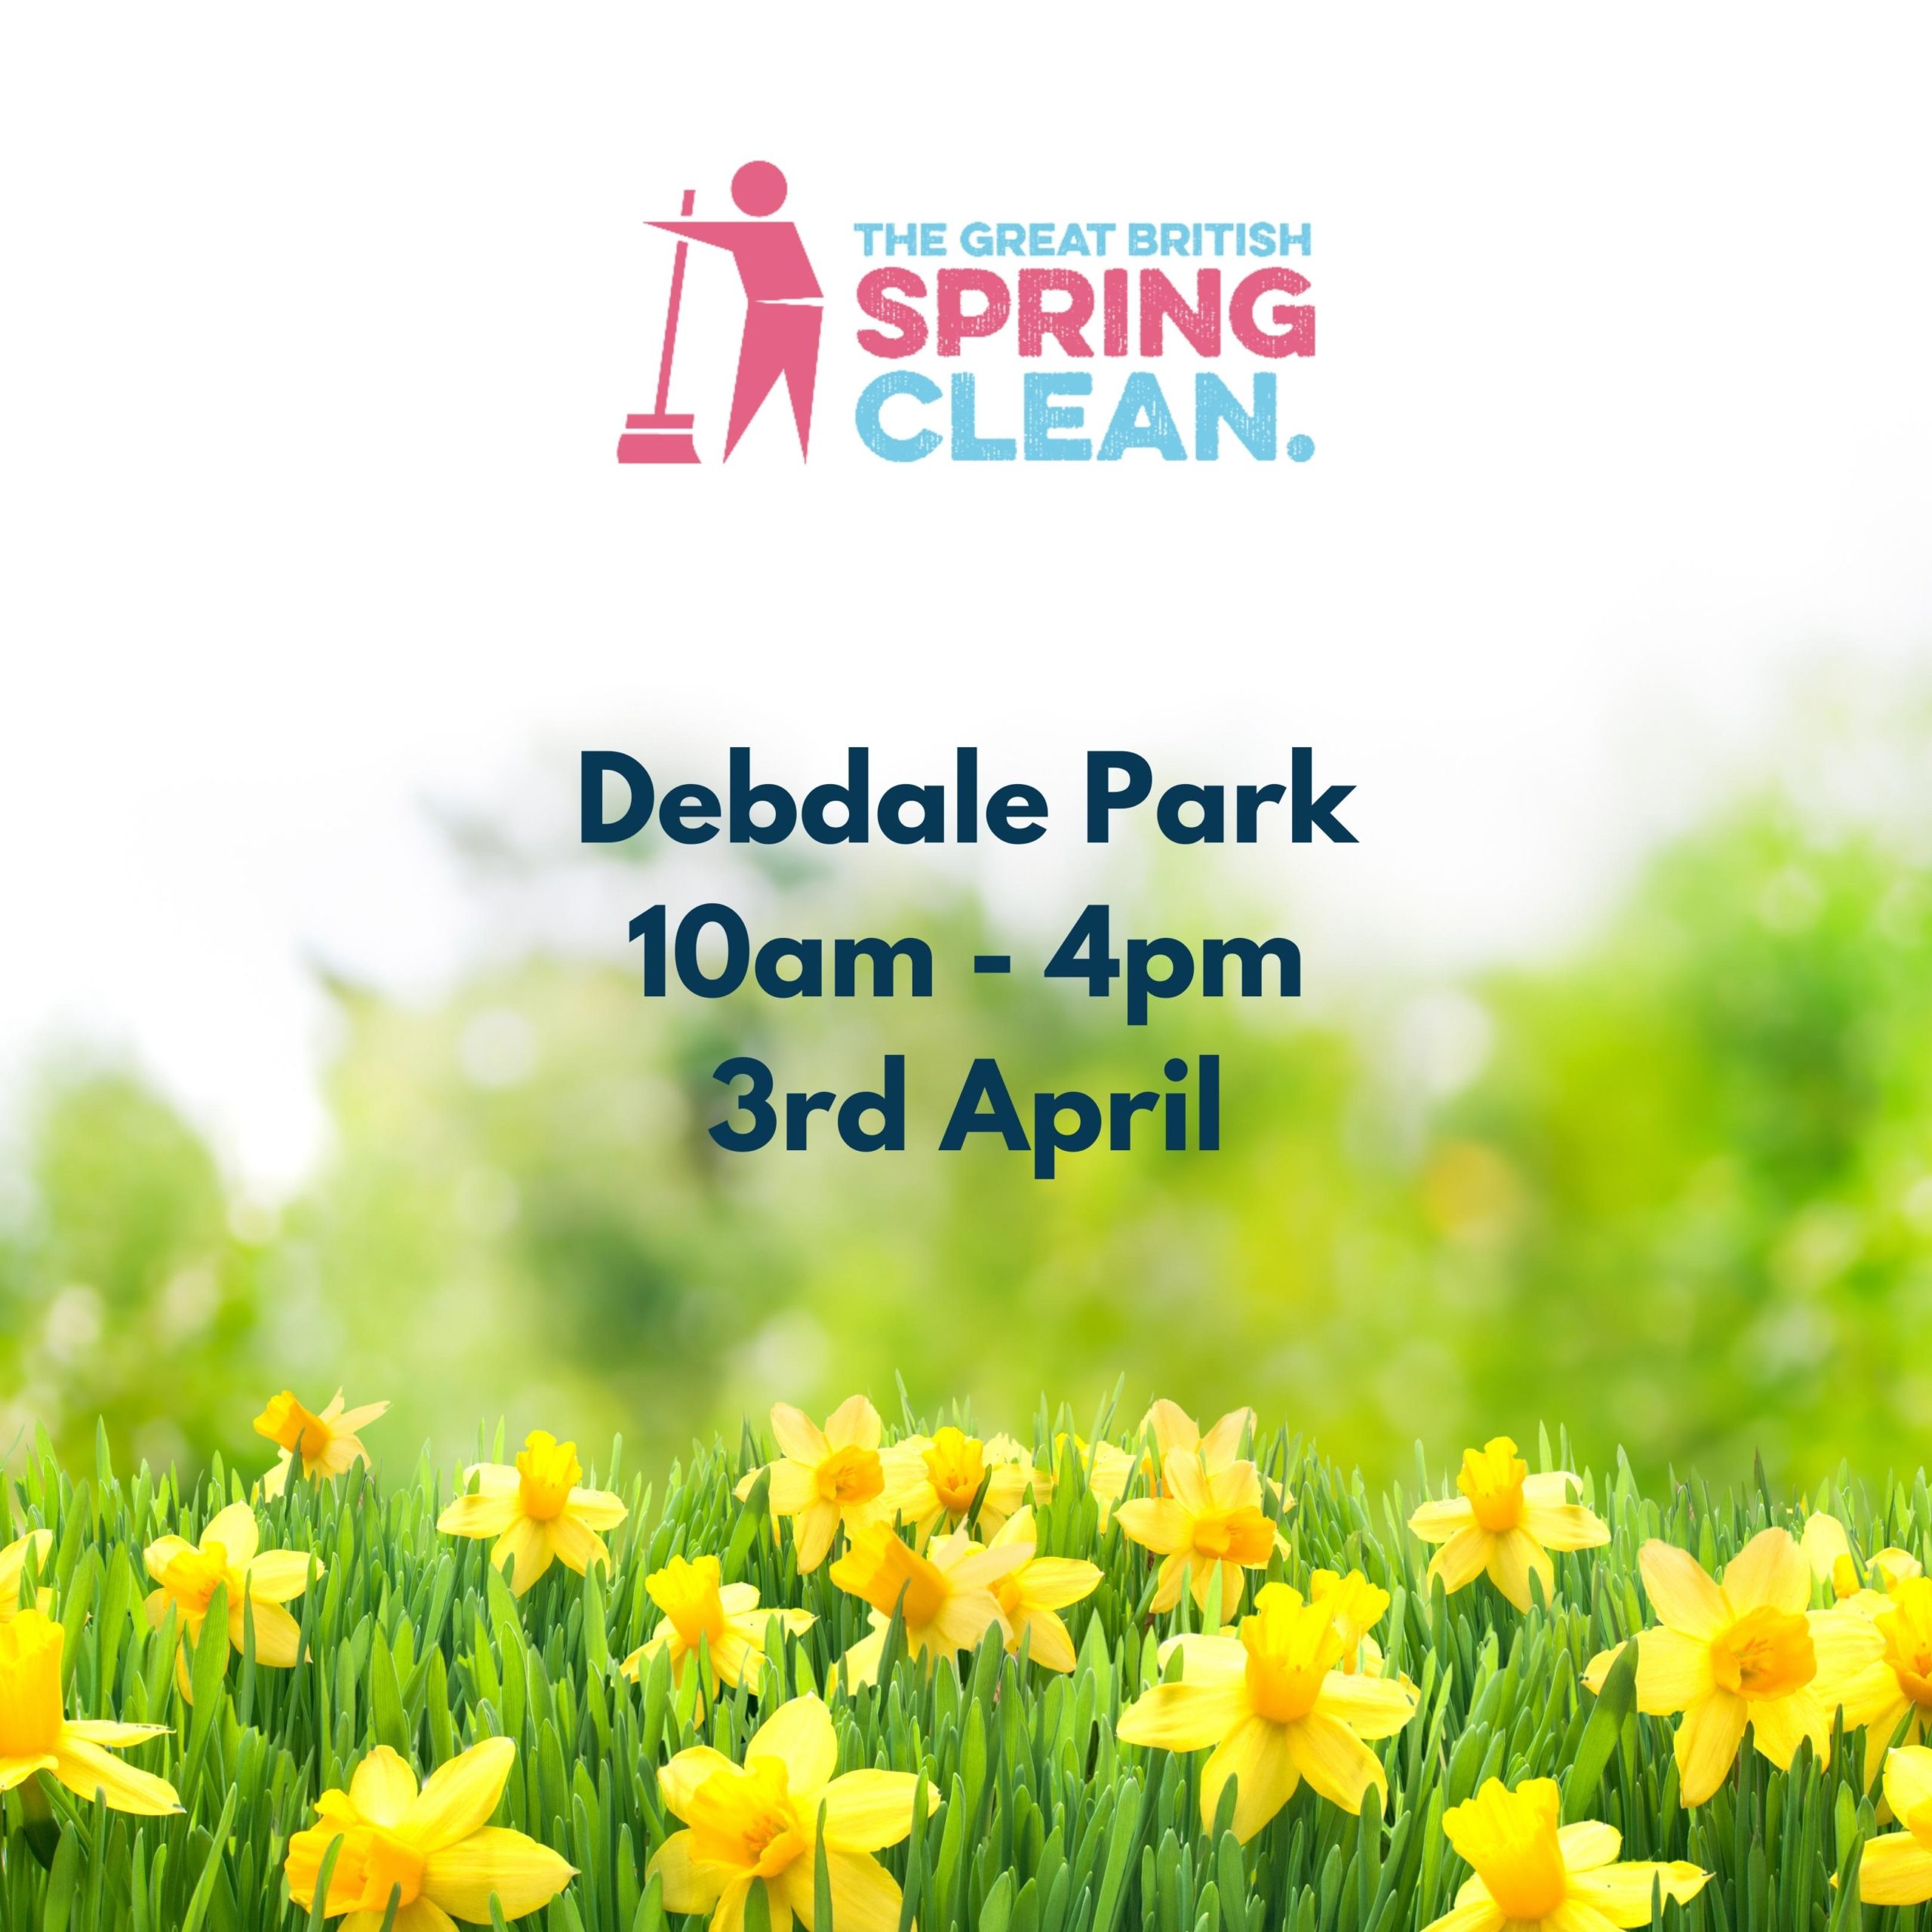 The Great British Spring Clean: Debdale Park